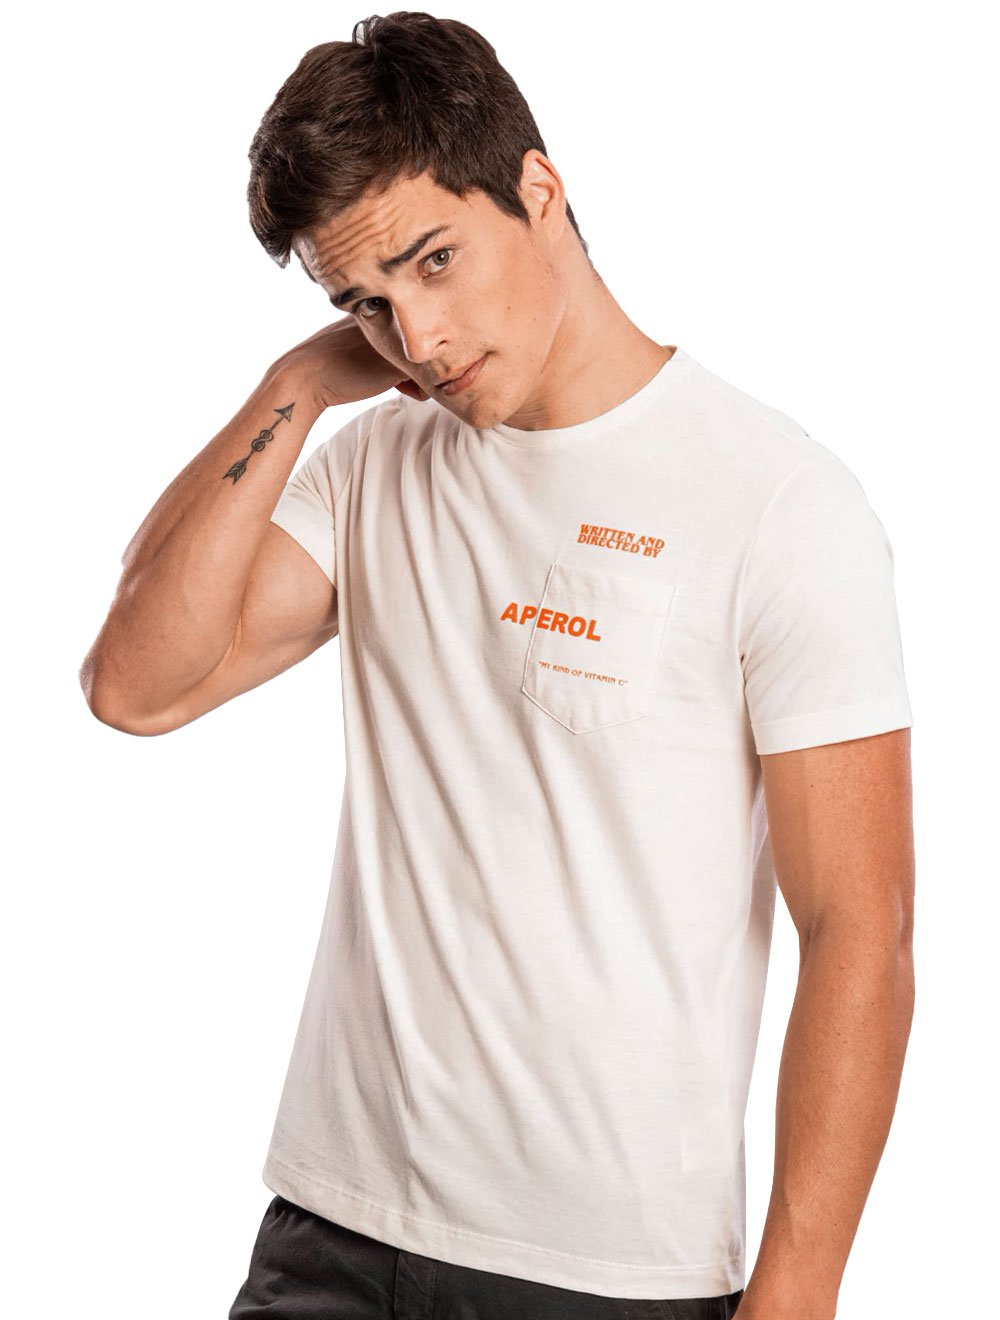 Camiseta Sergio K Masculina Pocket Directed By Aperol Off-White